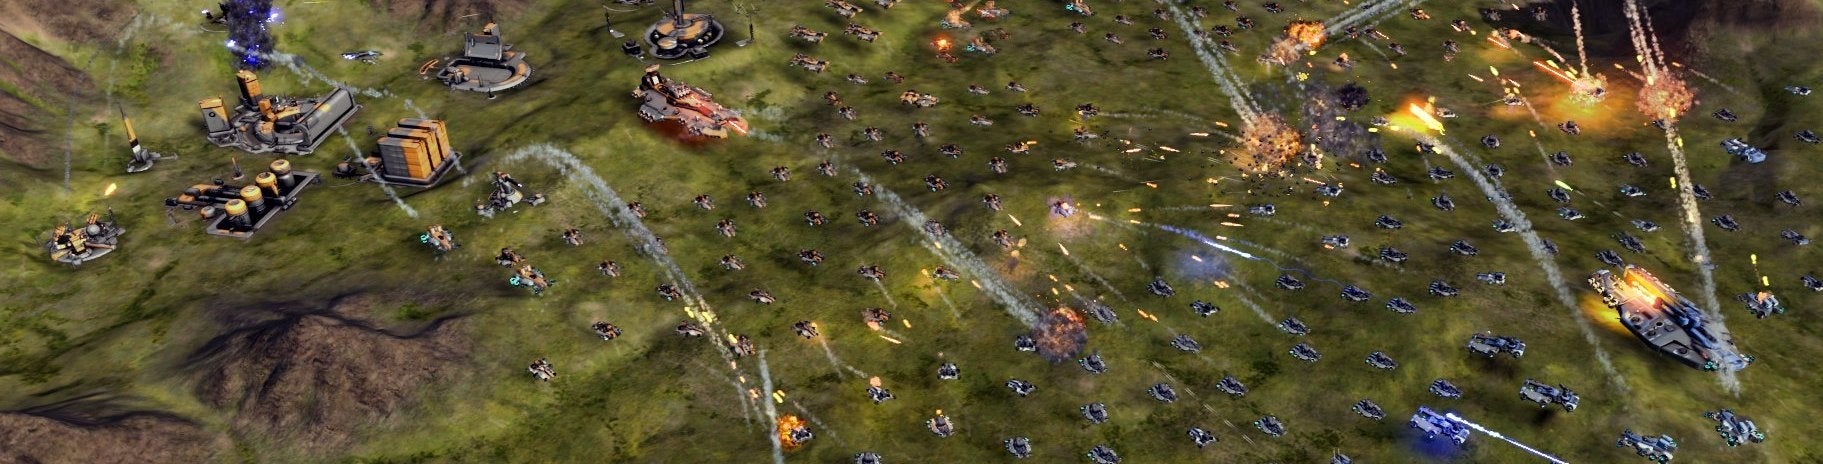 Image for Ashes of the Singularity: the first DX12 gaming benchmark tested